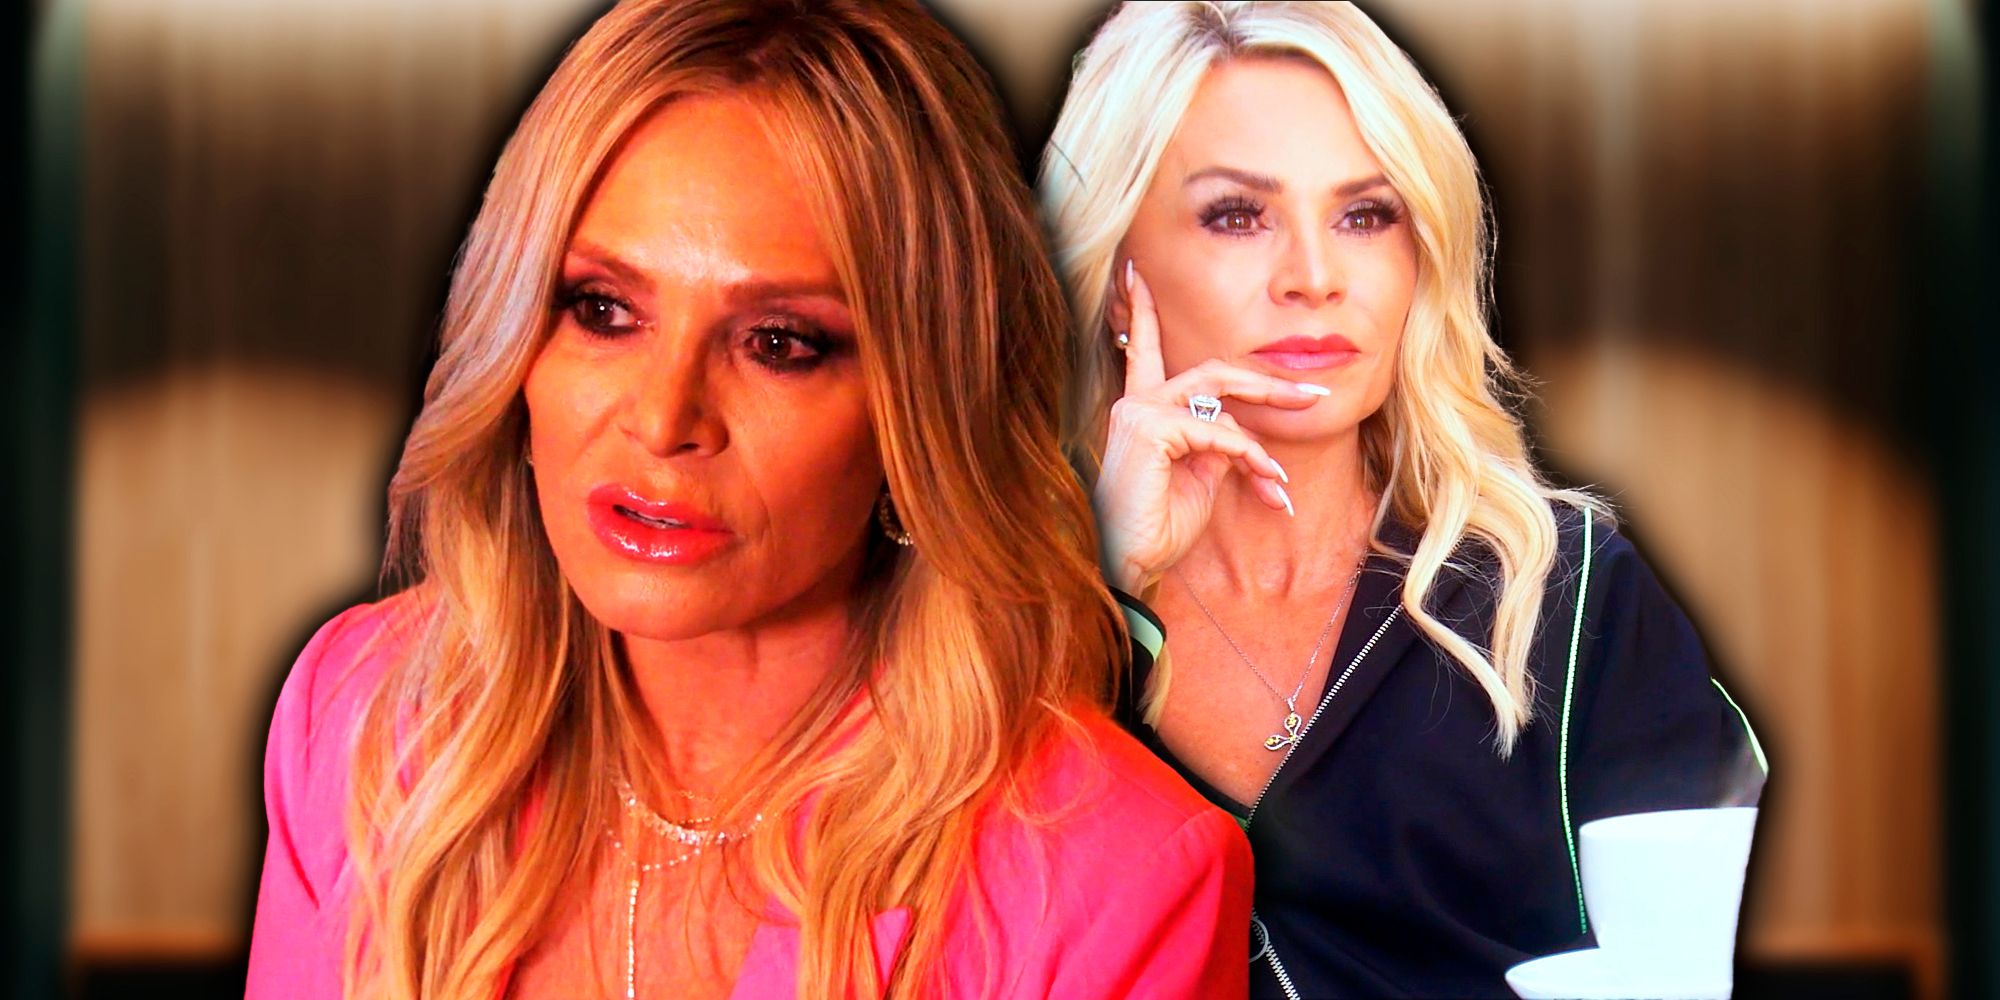 Side by side images of RHOC's Tamra Judge